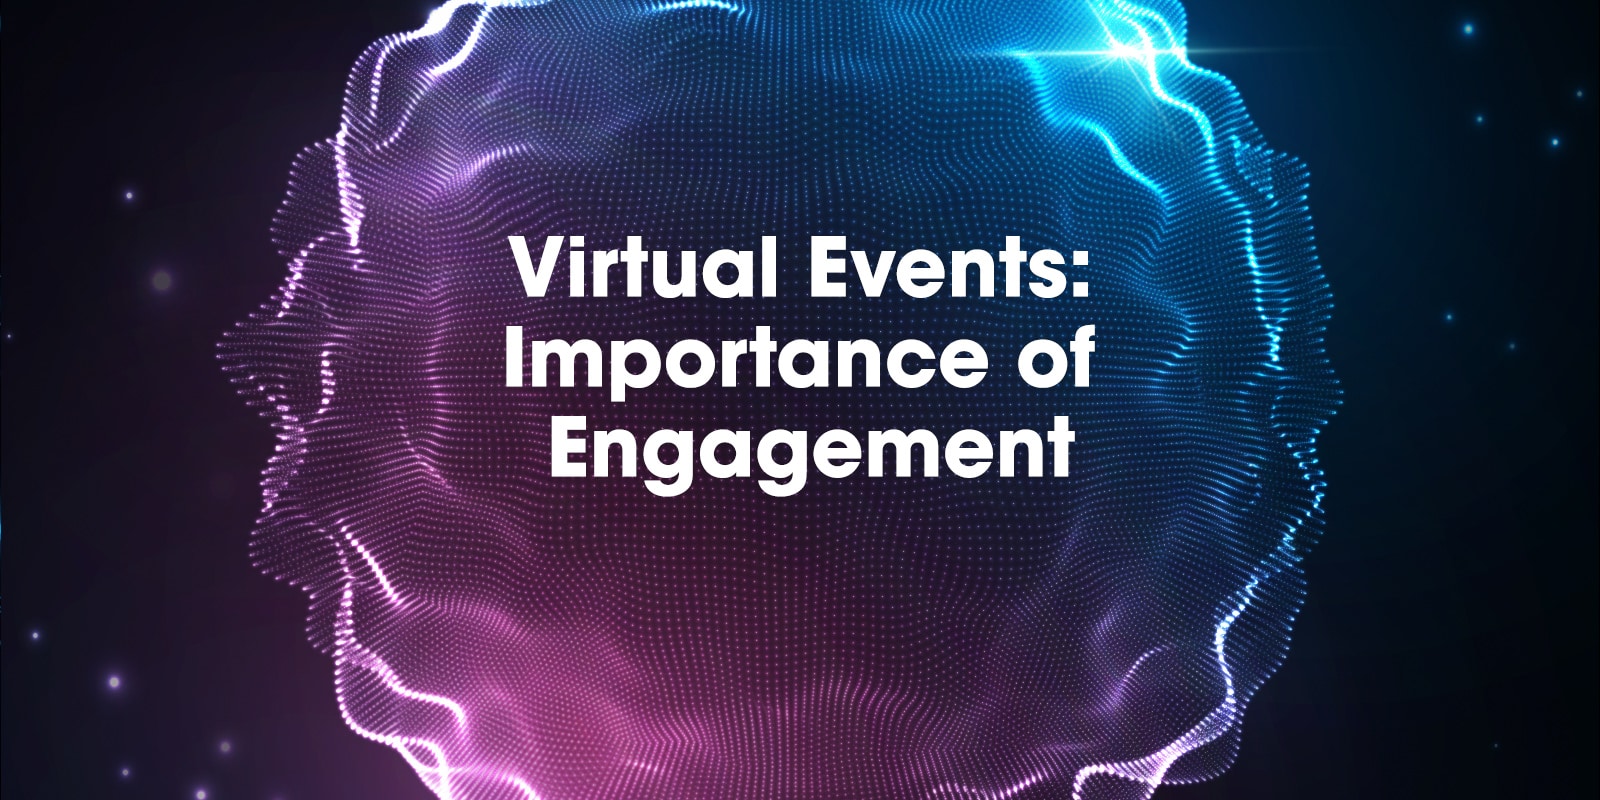 Virtual Events: Importance of Engagement